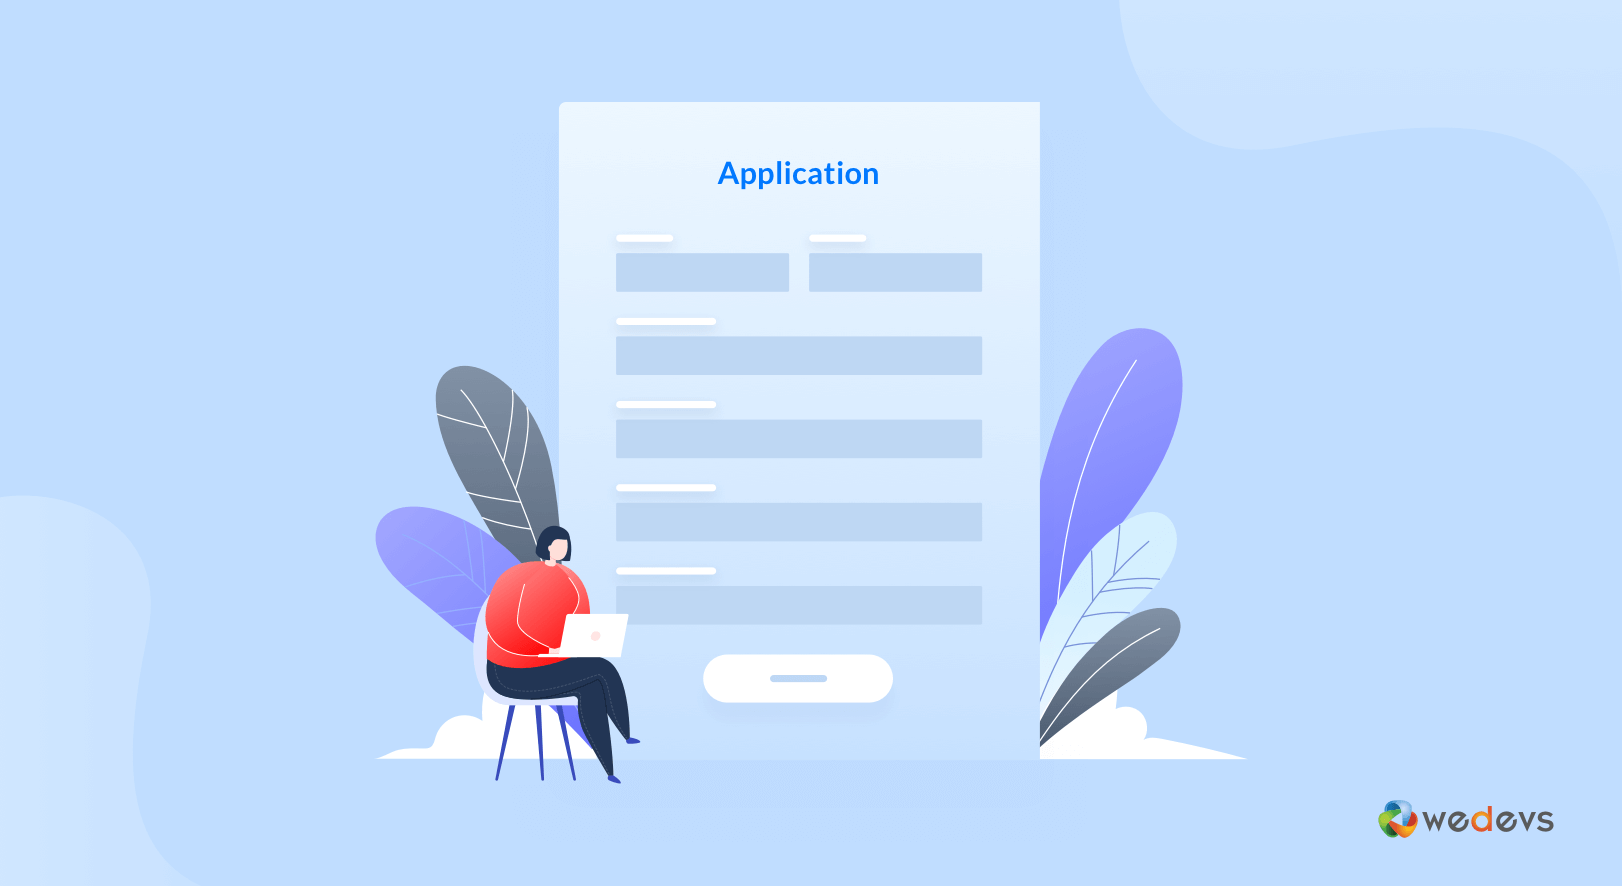 How to Create a Job Application Form in WordPress